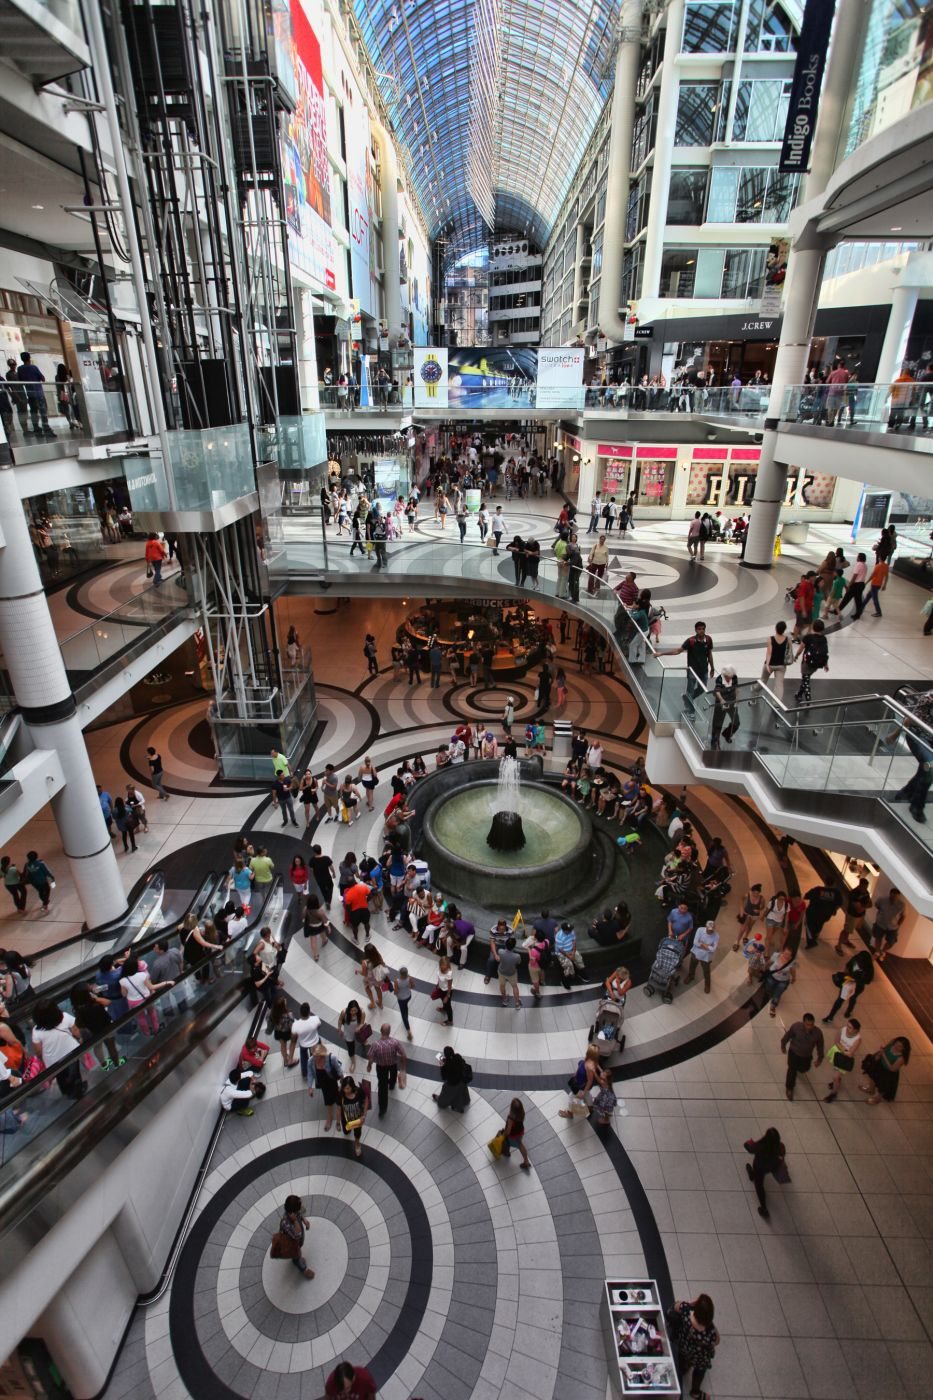 Toronto Eaton Centre is one of the best places to shop in Toronto